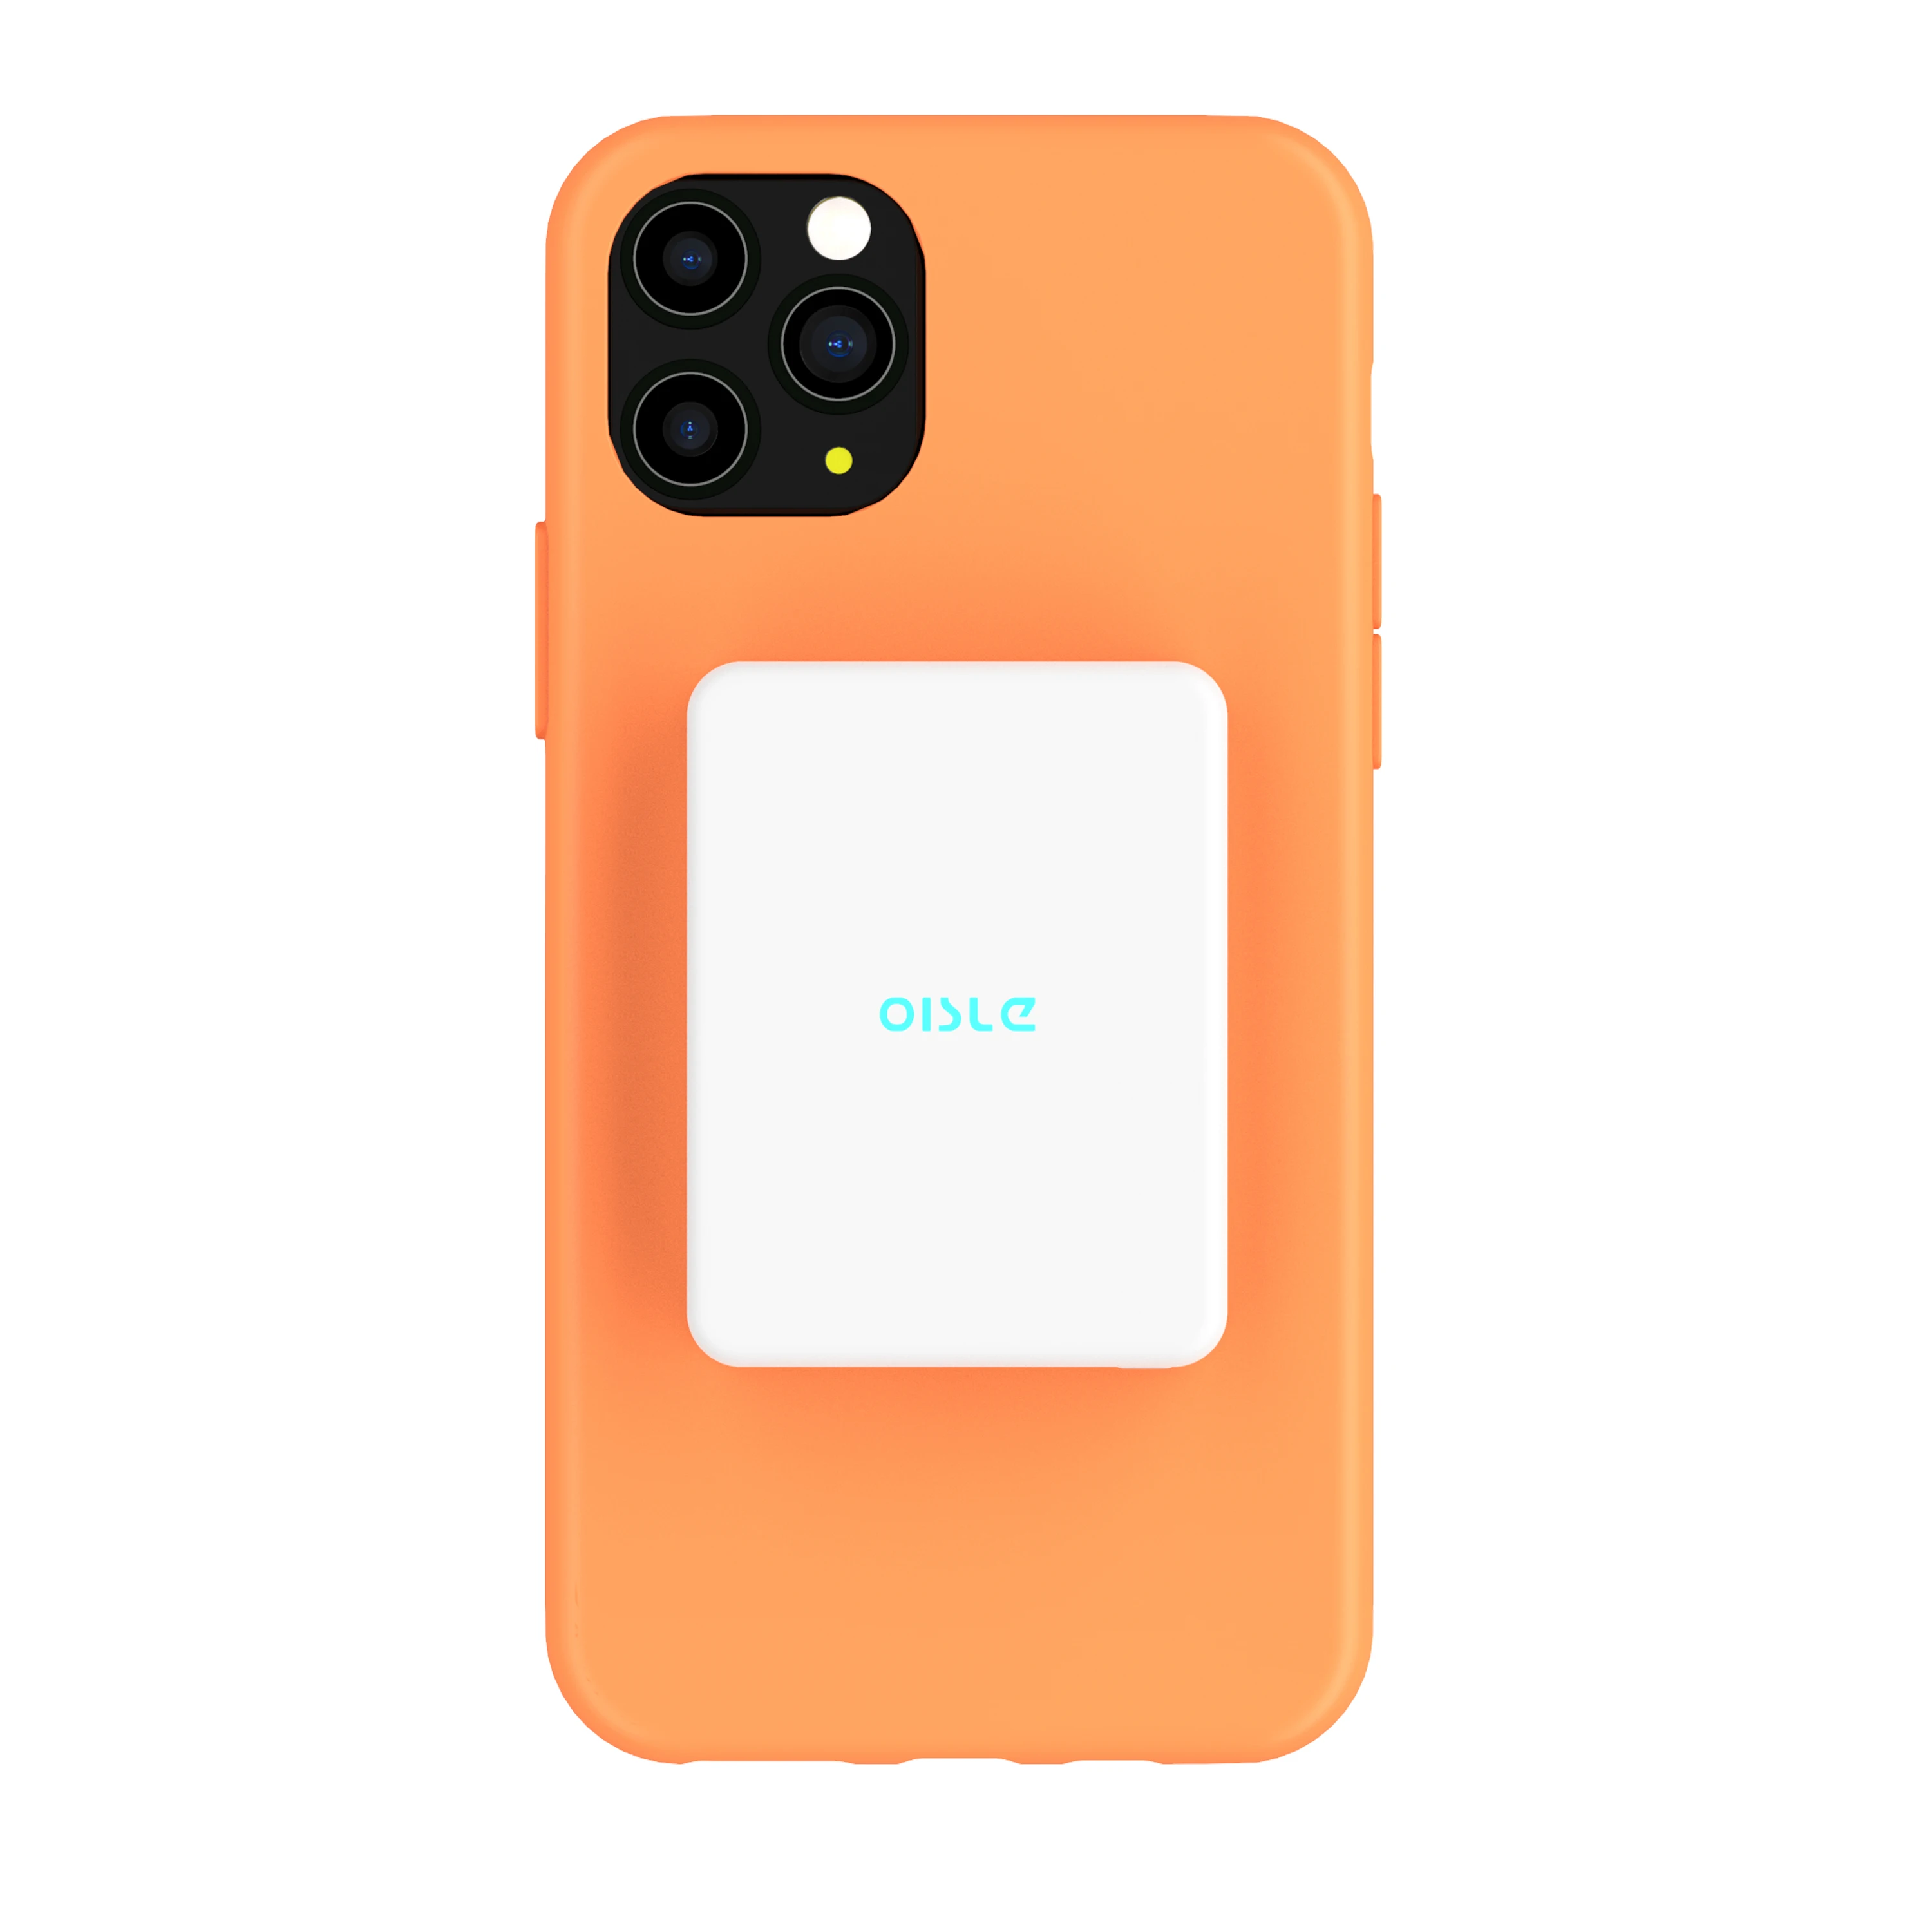 

OISLE Wireless Portable Fast Charger Power Bank Battery For iPhone 12/13/mini/pro/pro max, White, black, blue, pink, red